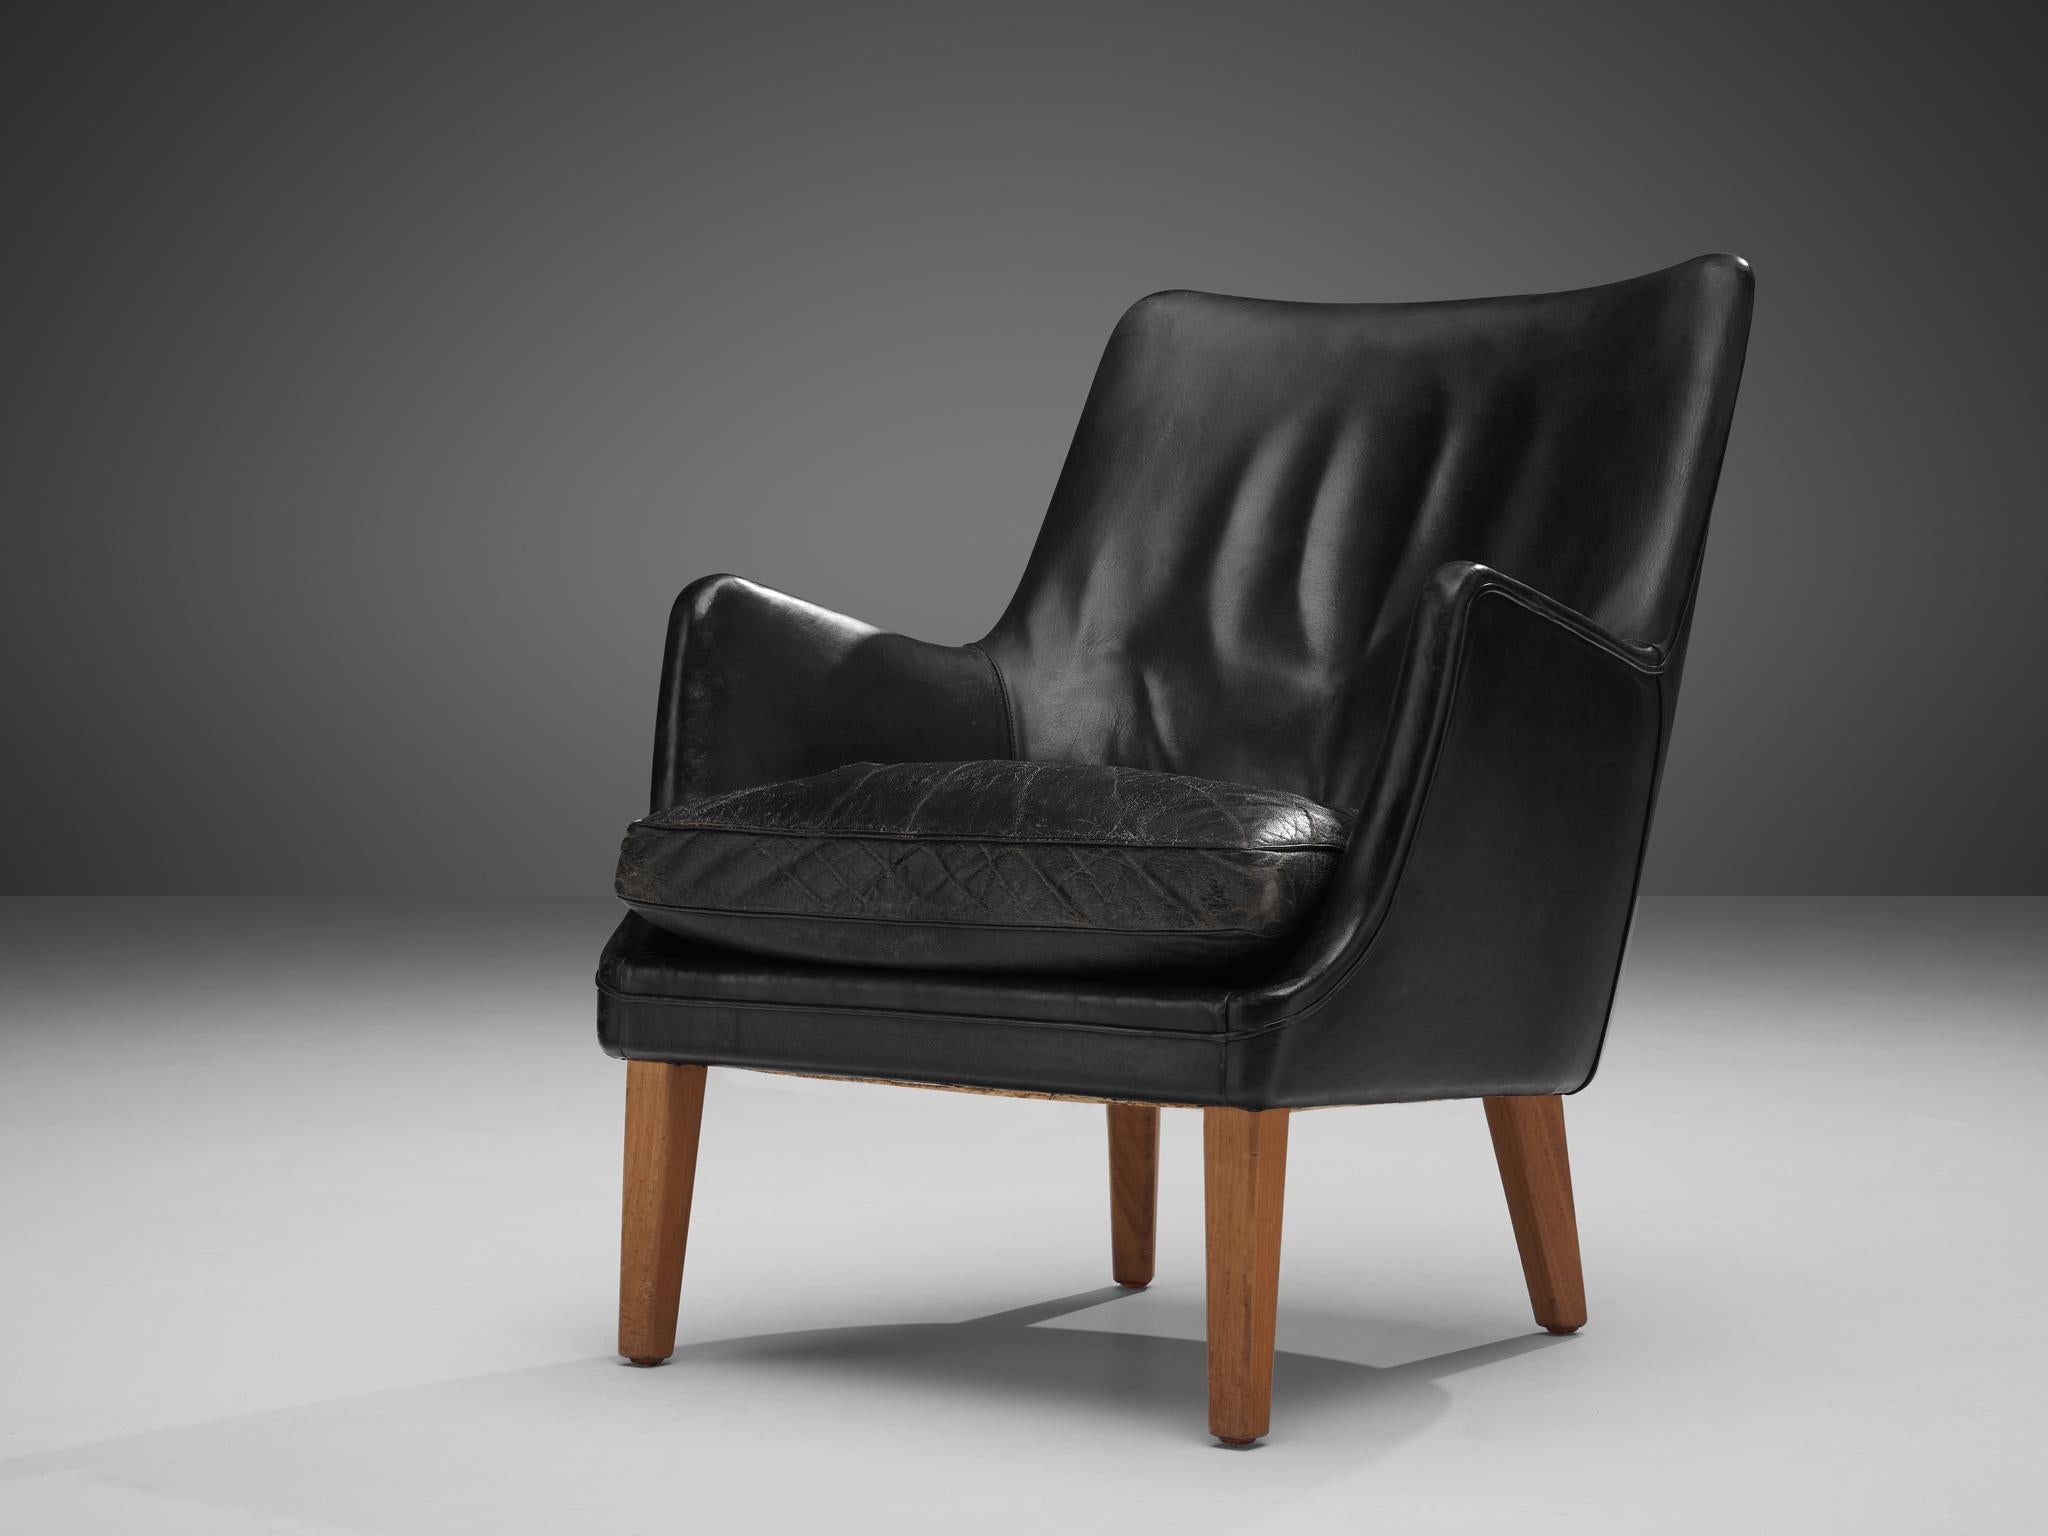 Arne Vodder for Ivan Schlechter, lounge chair, leather, teak, Denmark, 1953

Distinct design by Arne Vodder and manufactured by Ivan Schlechter The exterior of the lounge chair is created by the high, slanted backrest with rounded armrests. A